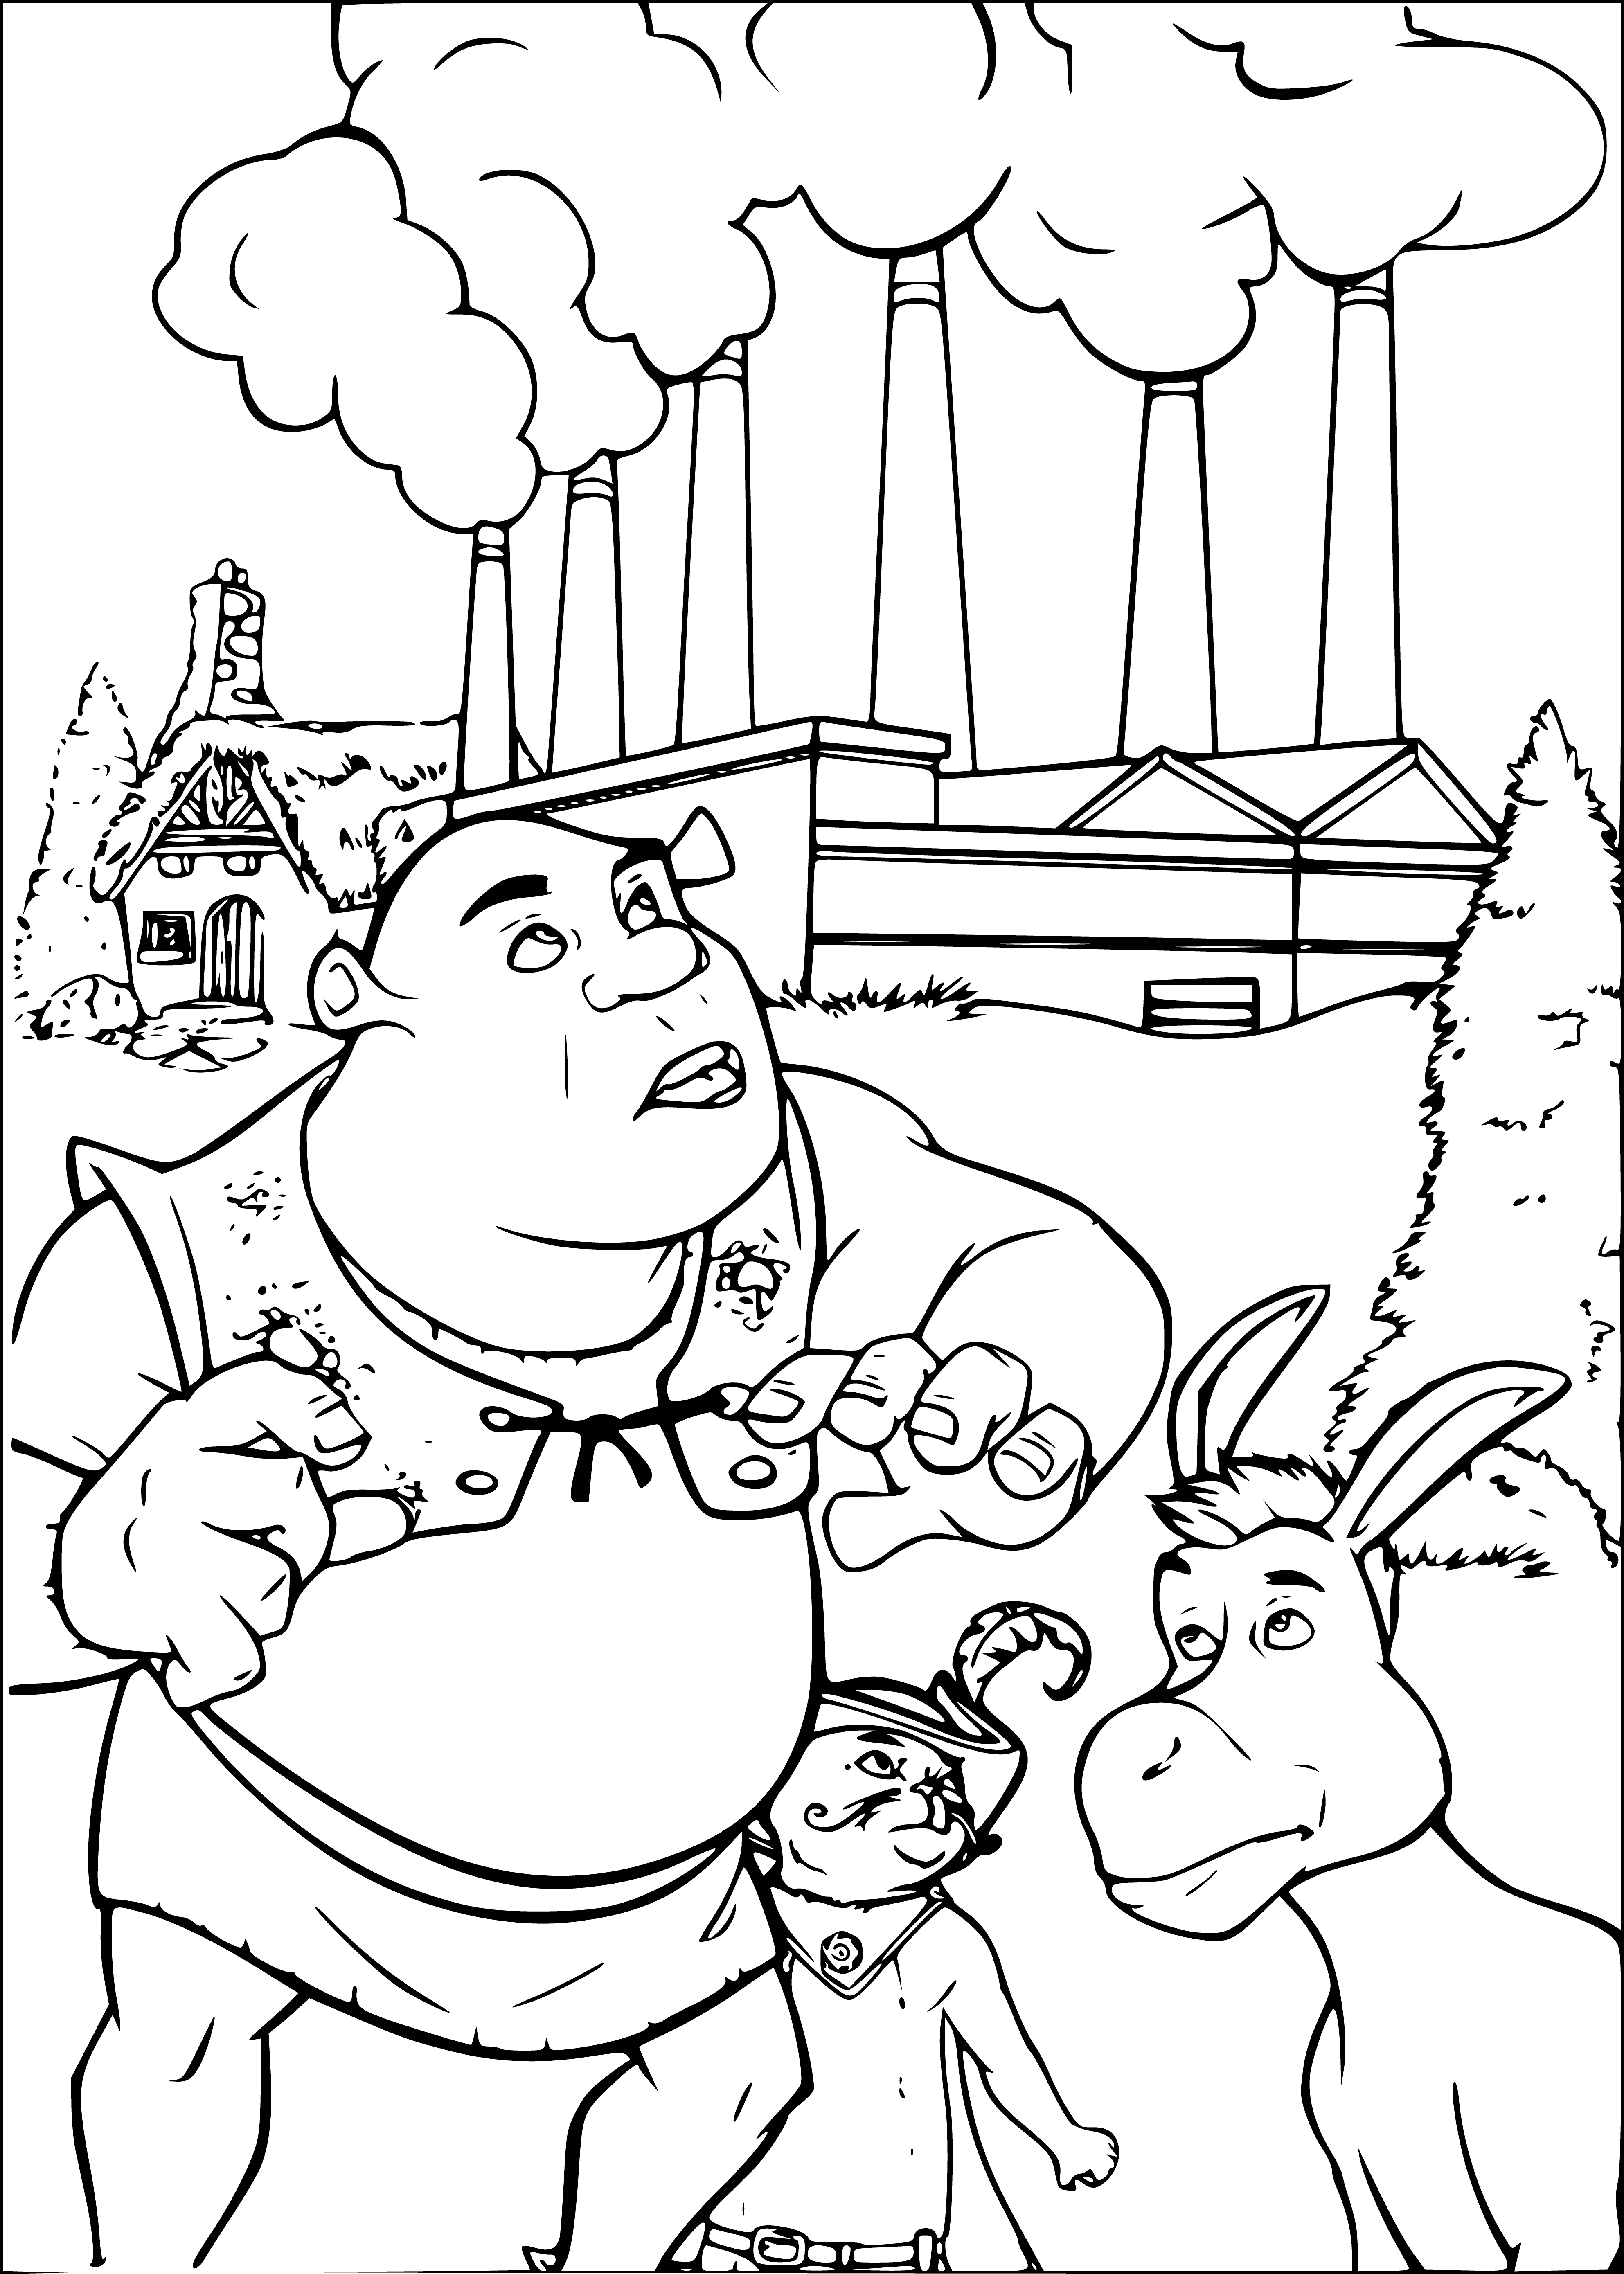 Shrek, cat and donkey coloring page